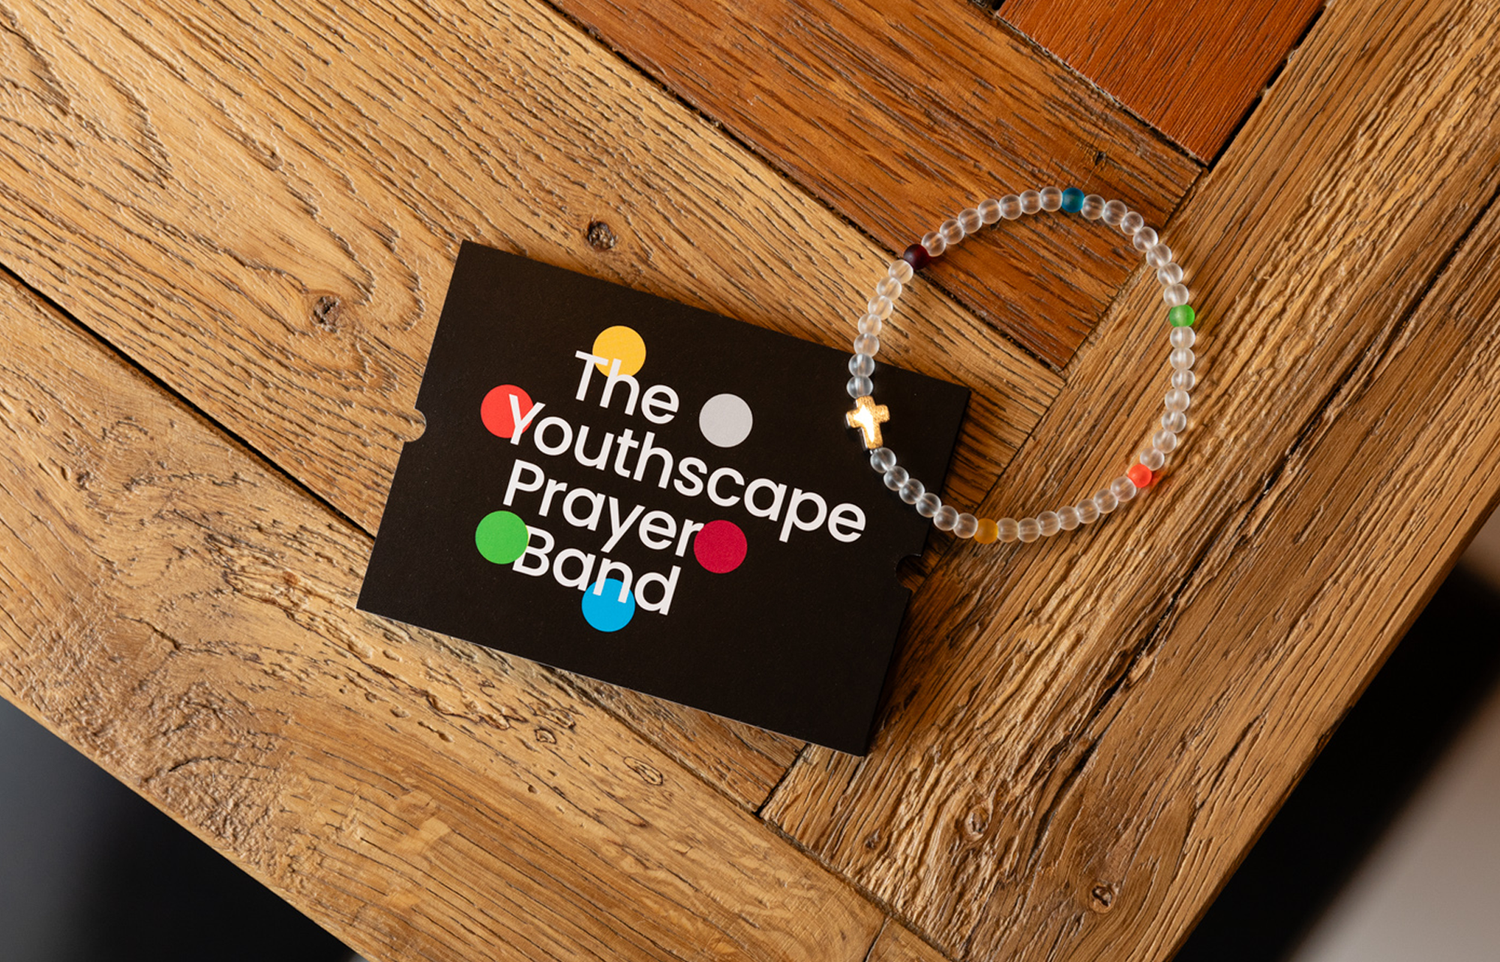 The Youthscape Prayer Band